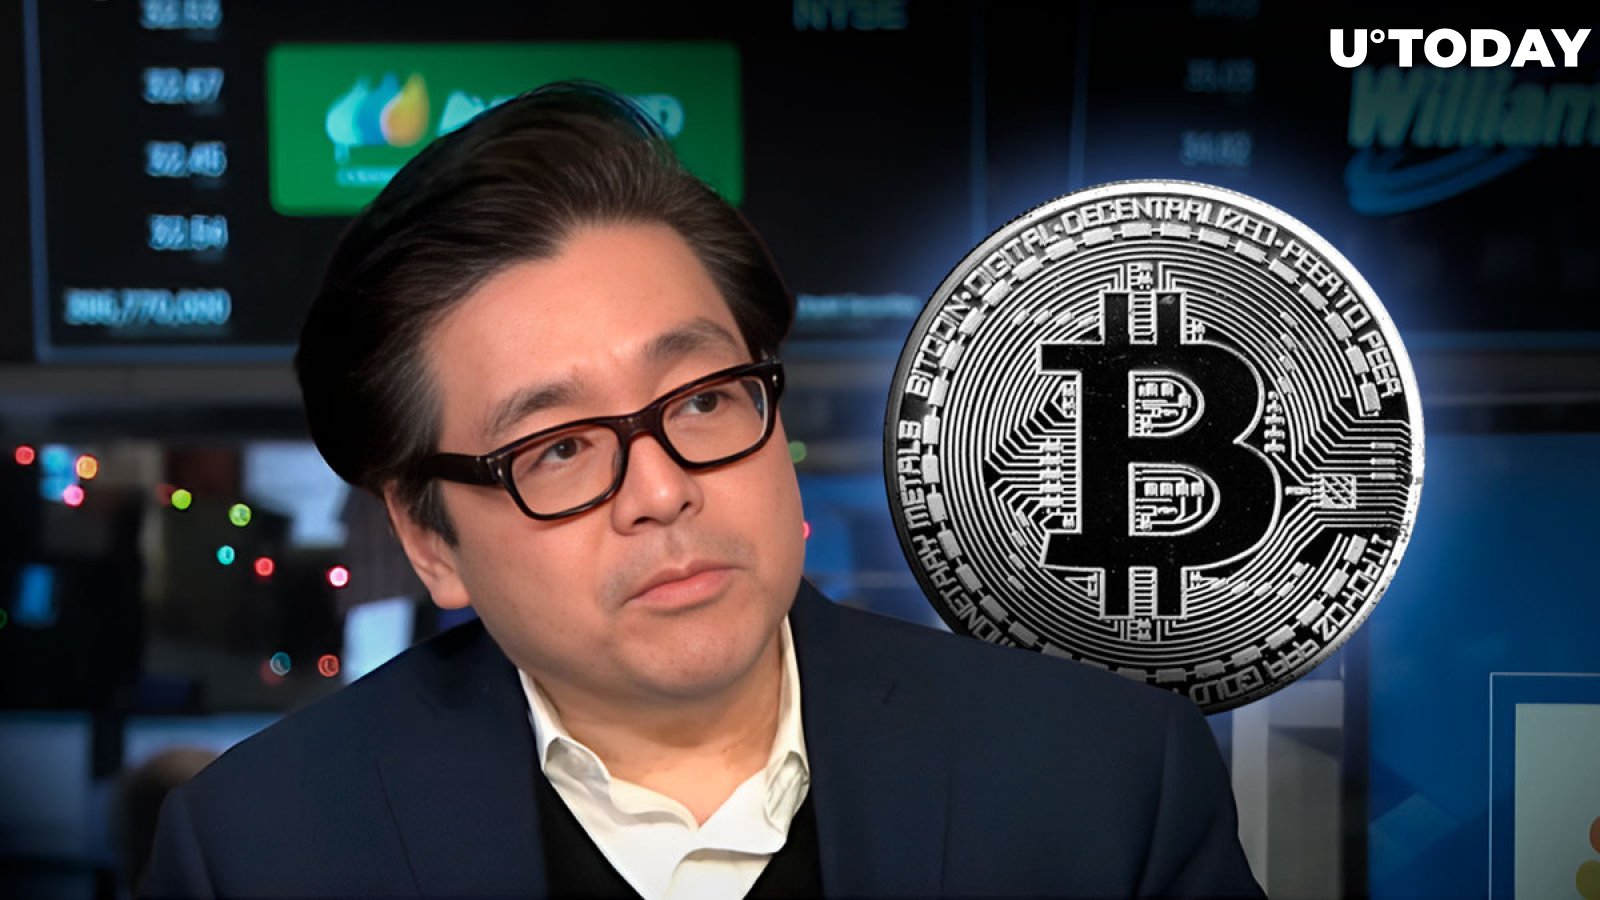 Fundstrat's Tom Lee Claims Bitcoin (BTC) Price Hasn't Topped Yet